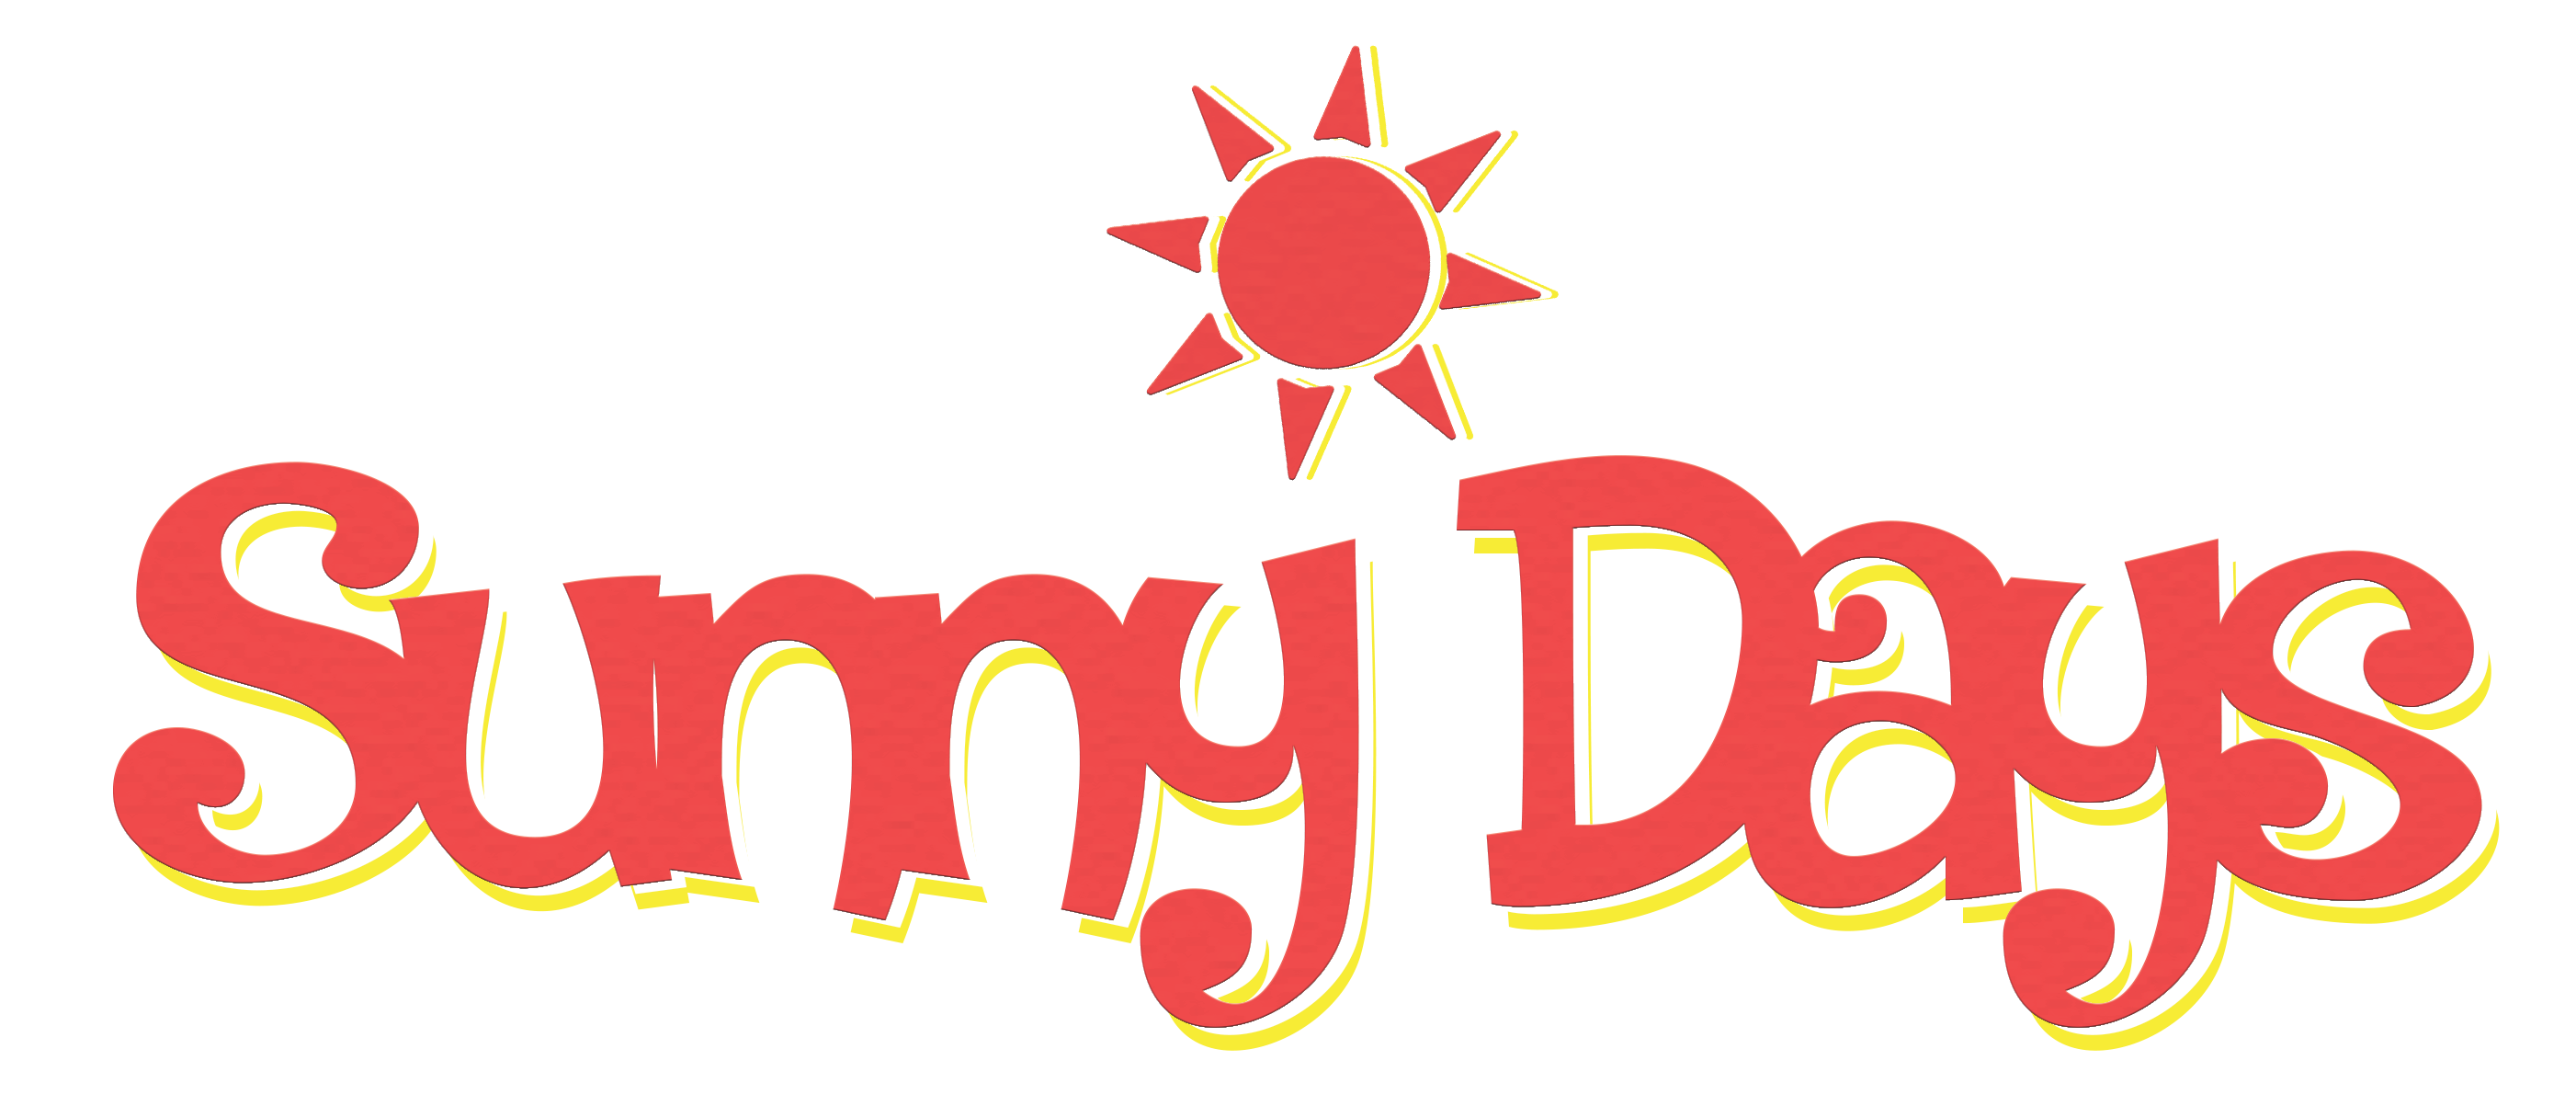 Days childcare . Sunny clipart day activity